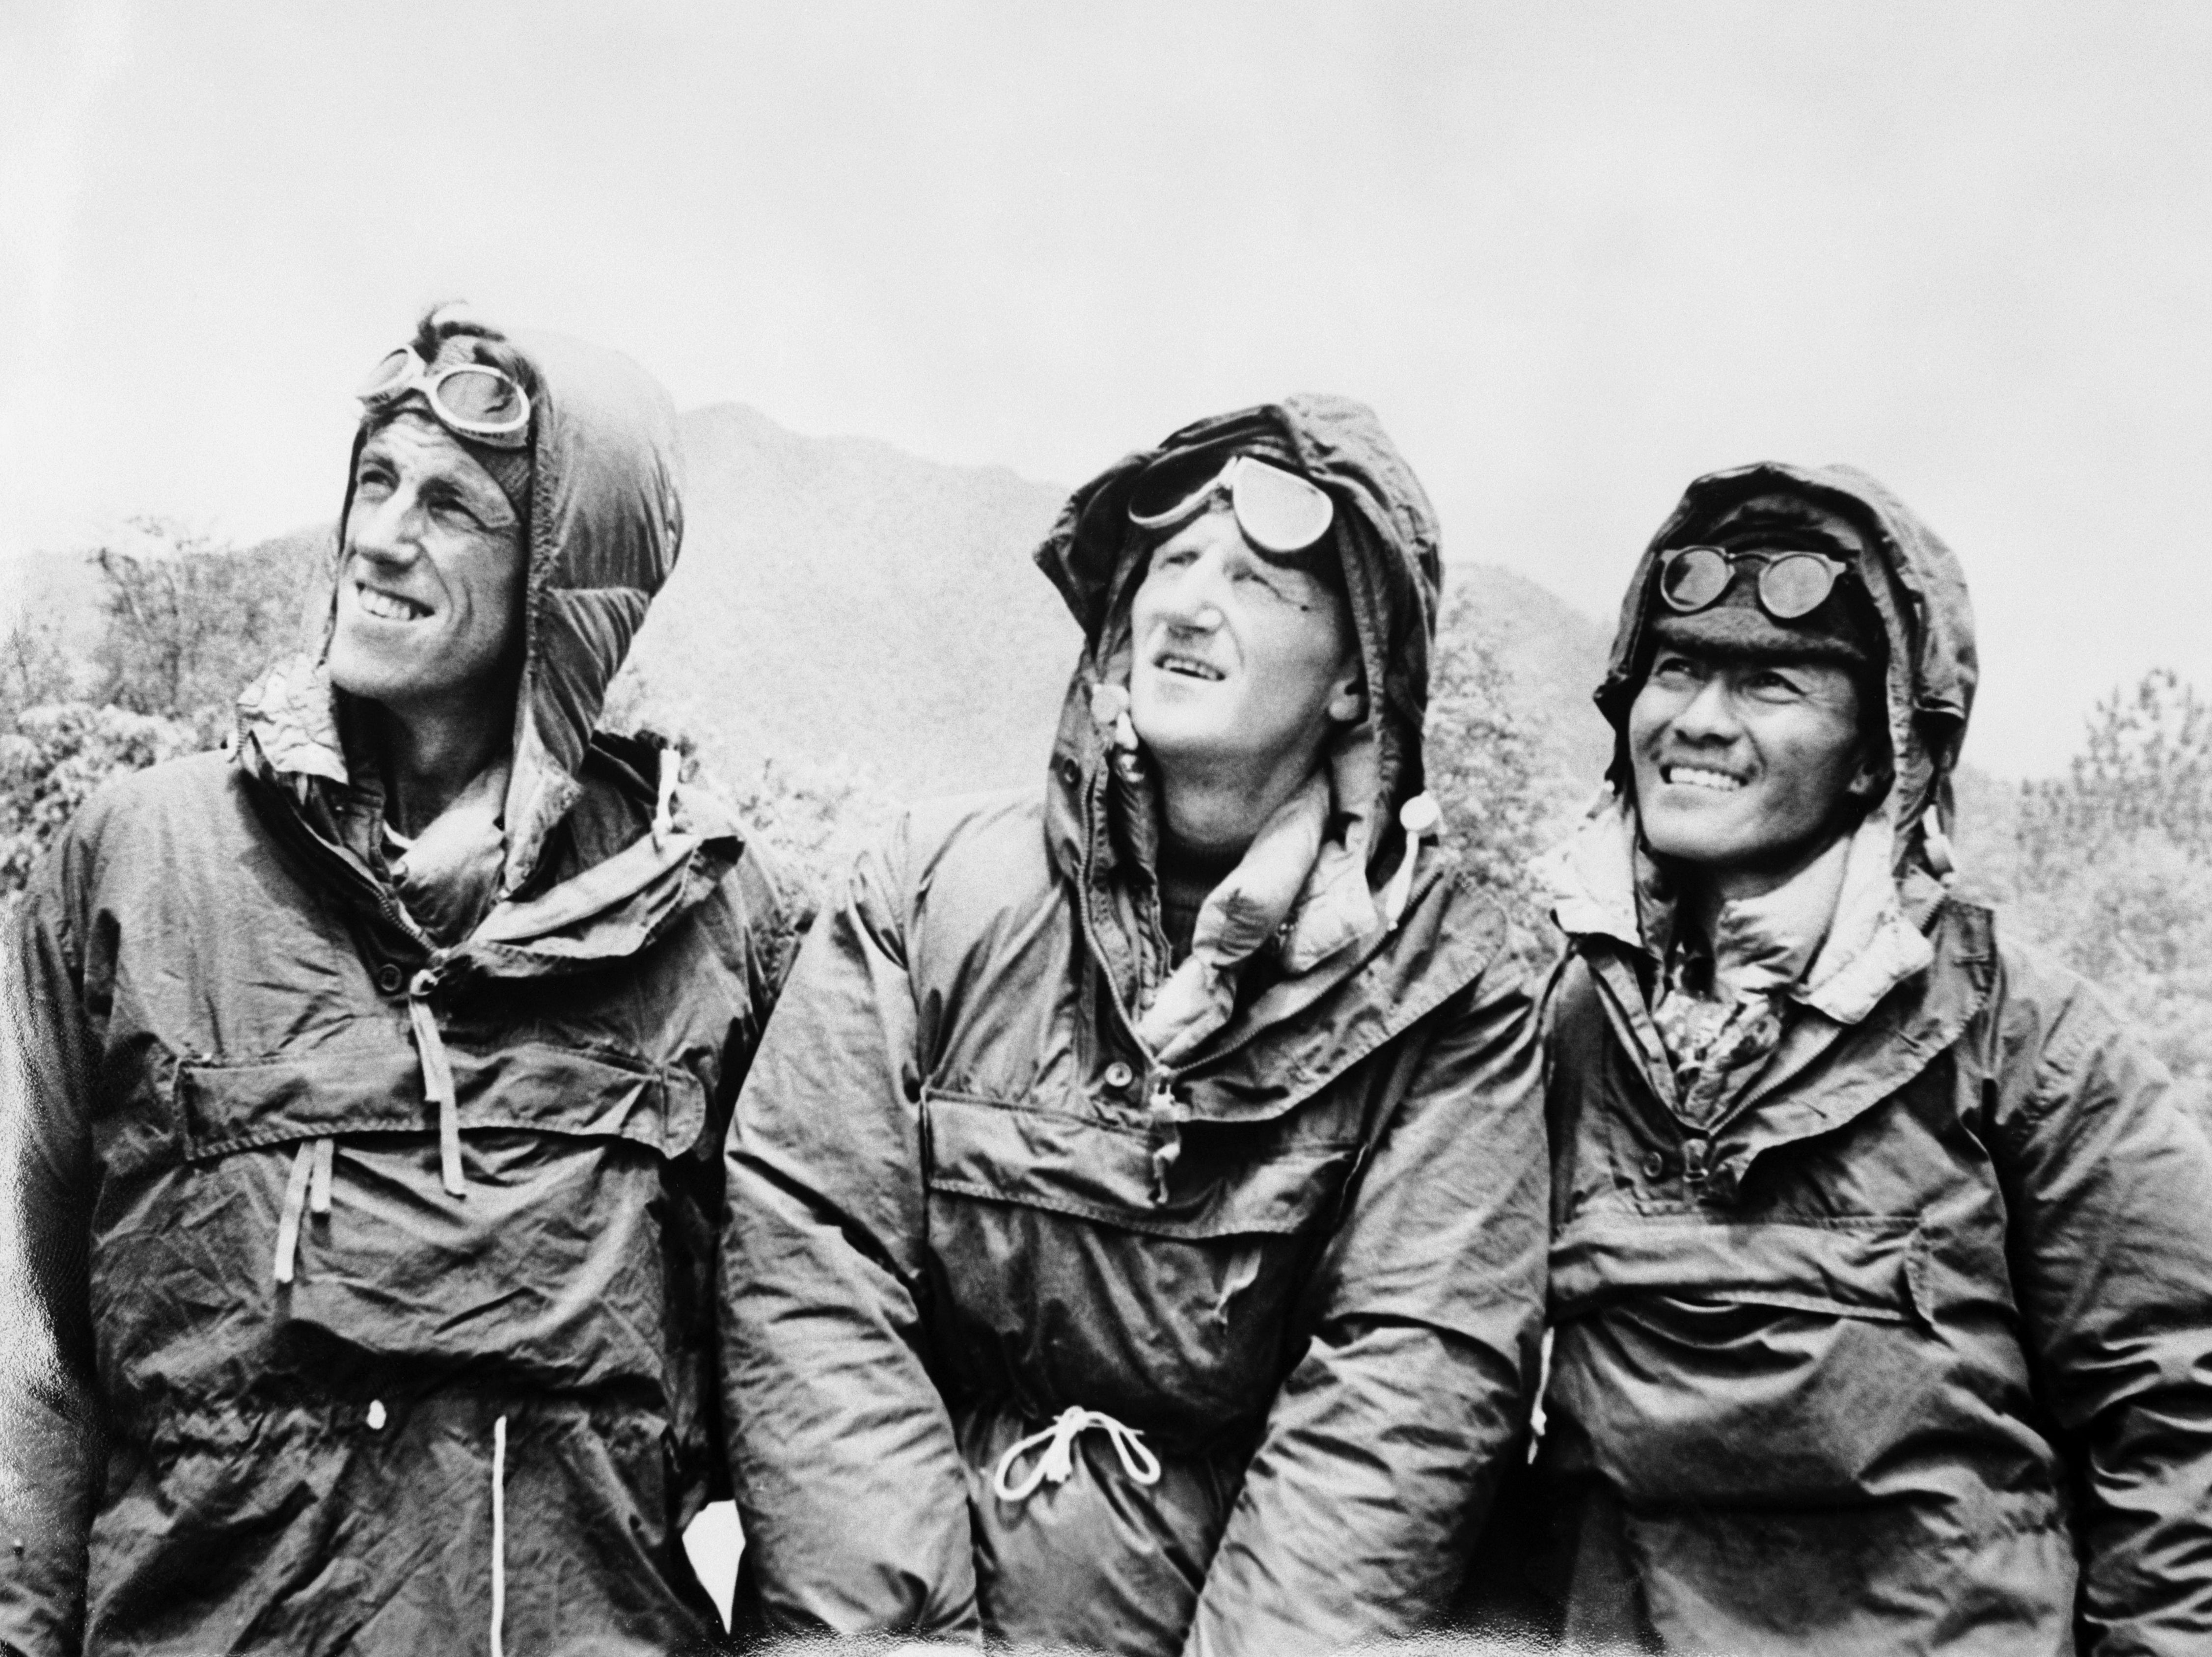 Edmund Hillary (left), Tensing Norgay (right) and expedition leader Colonel John Hunt in Kathmandu, Nepal, after descending from Everest in 1953